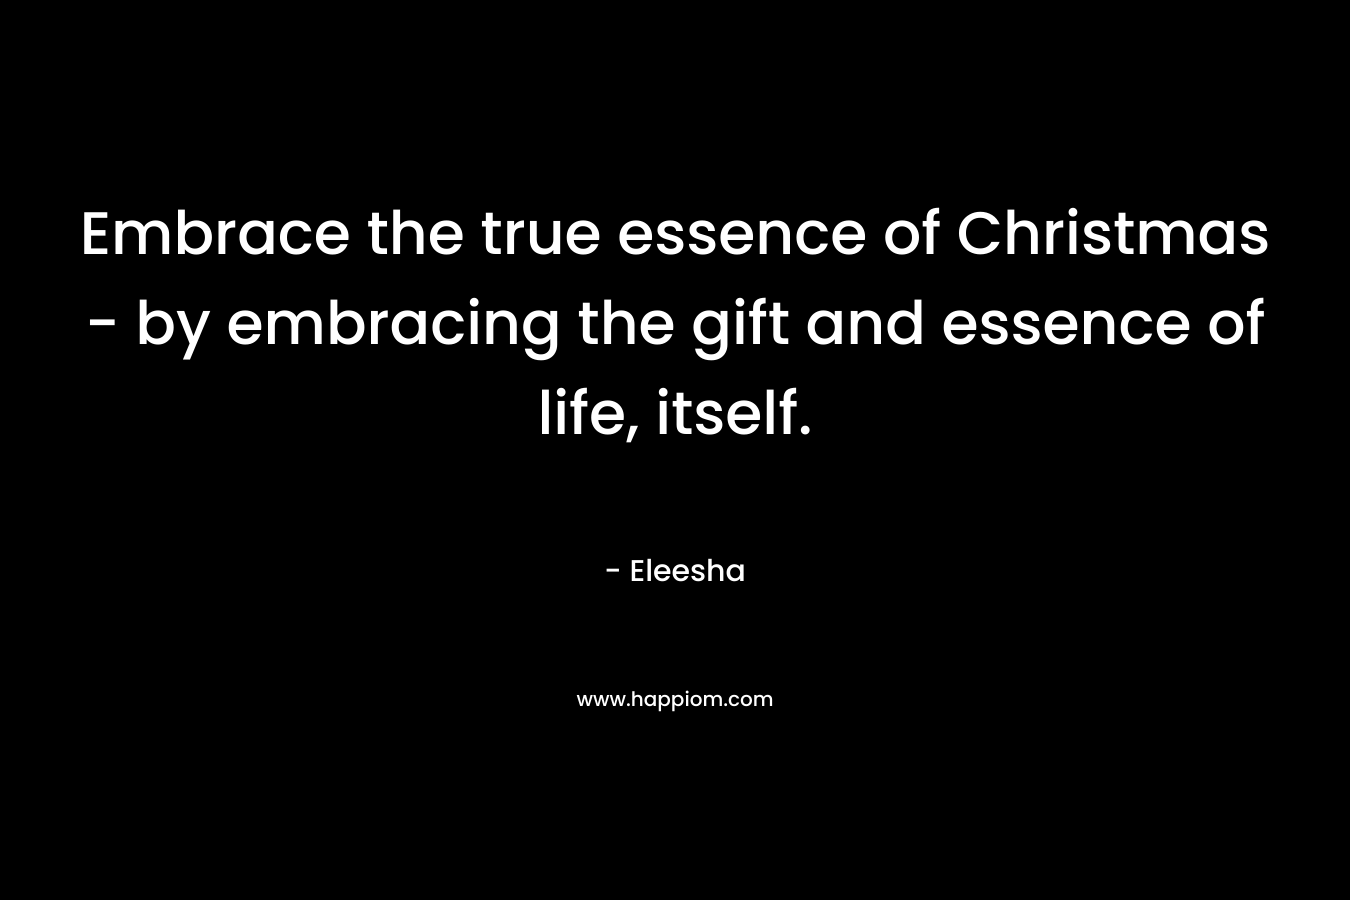 Embrace the true essence of Christmas - by embracing the gift and essence of life, itself.